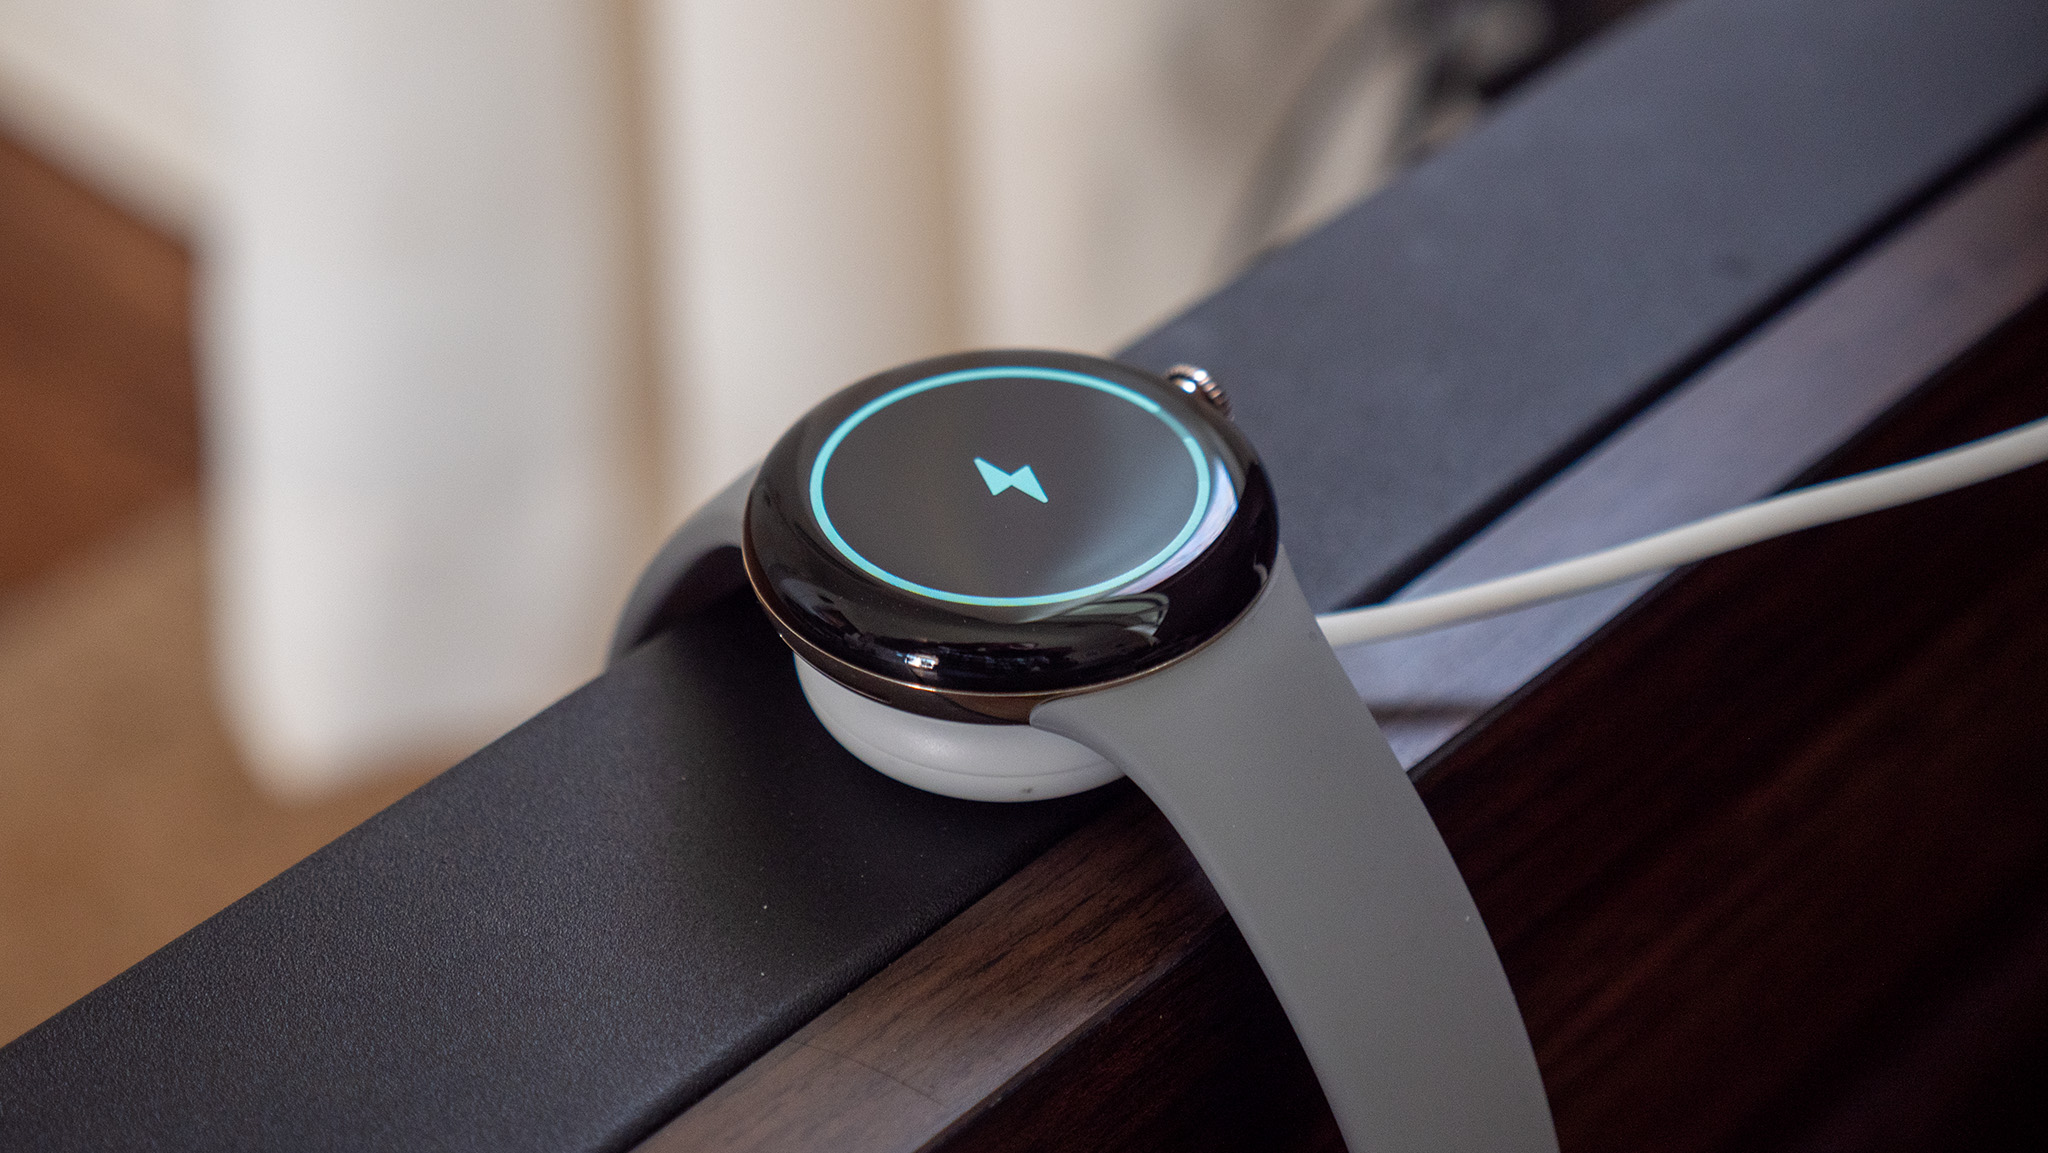 Google Pixel Watch charging on the included magnetic dock